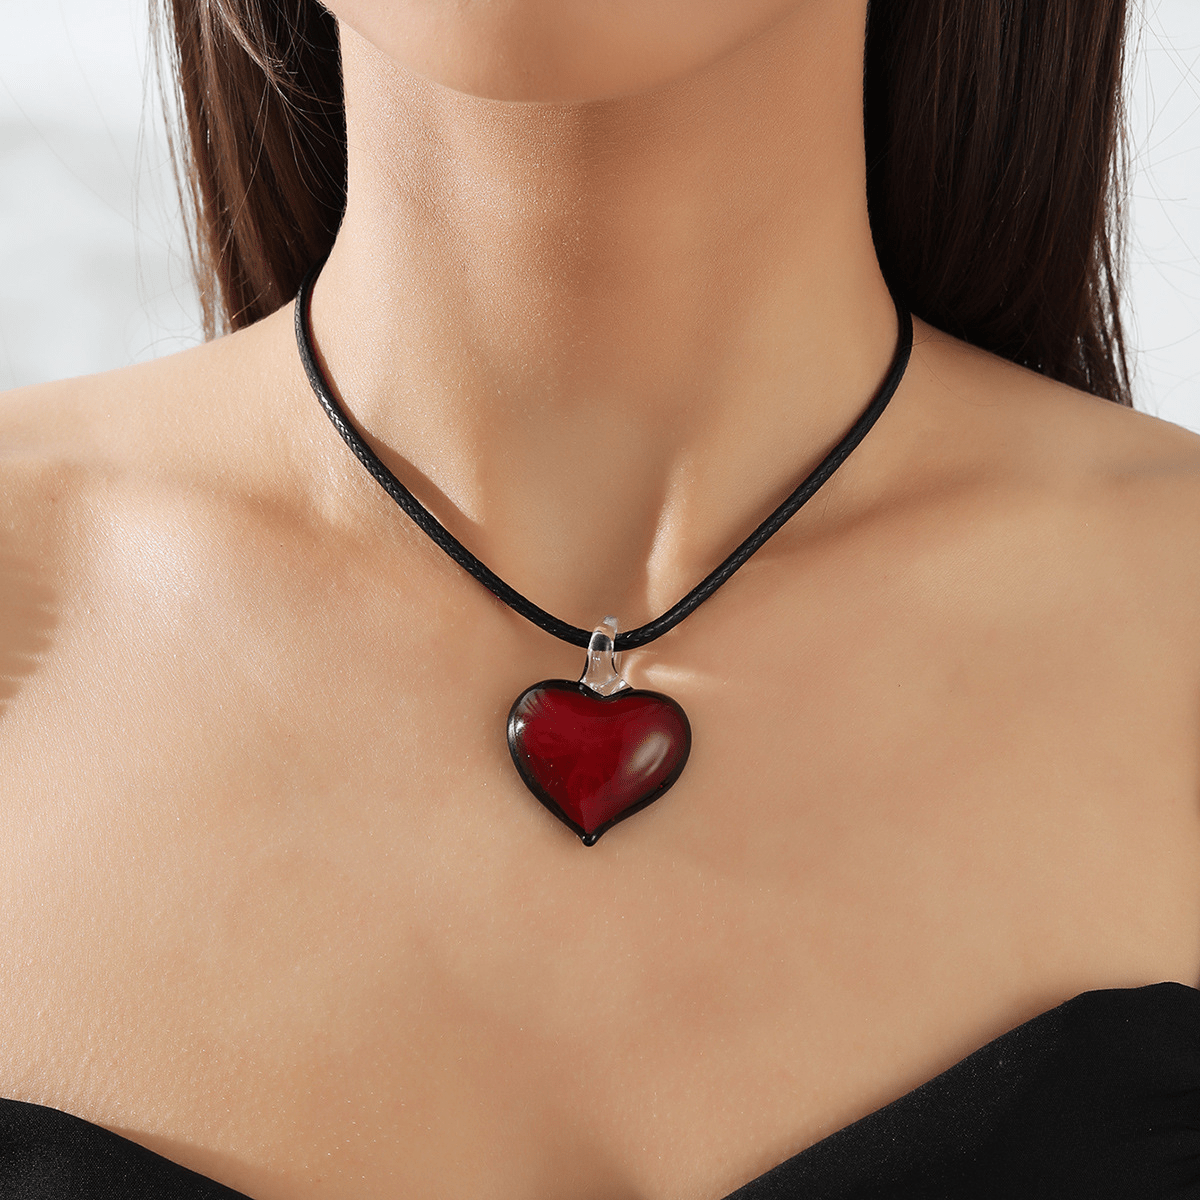 Magnetic Couples Heart Necklaces - Couple Jewelry | Infinity Charm Ruby Red Heart | Silver Necklaces